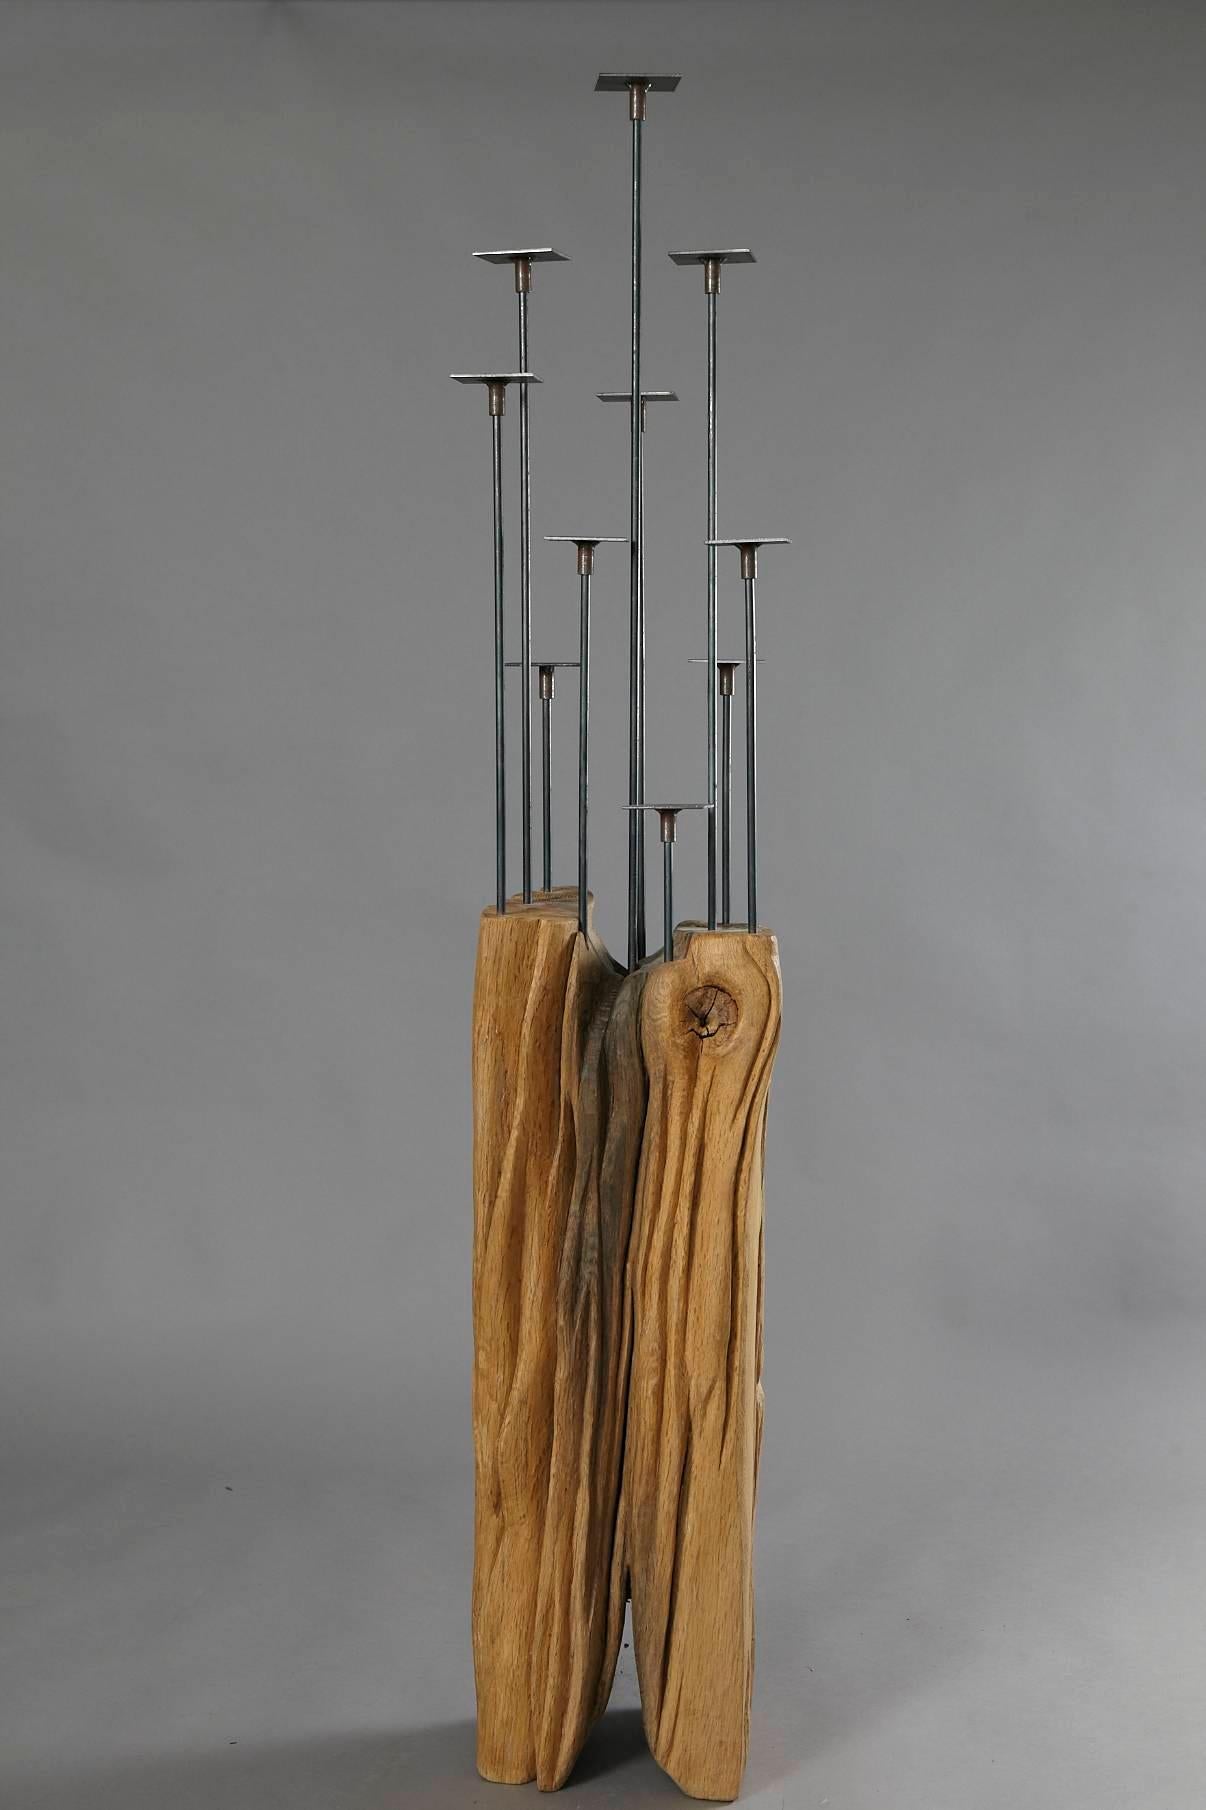 Kerzenständer - Candelabra 
Candelabra made from a solid piece of oak with welded black steel arms and plateaus for candles in different heights inserted into the oak, by German artist Hanni Dietrich. 
All wood used by the artist is from salvaged